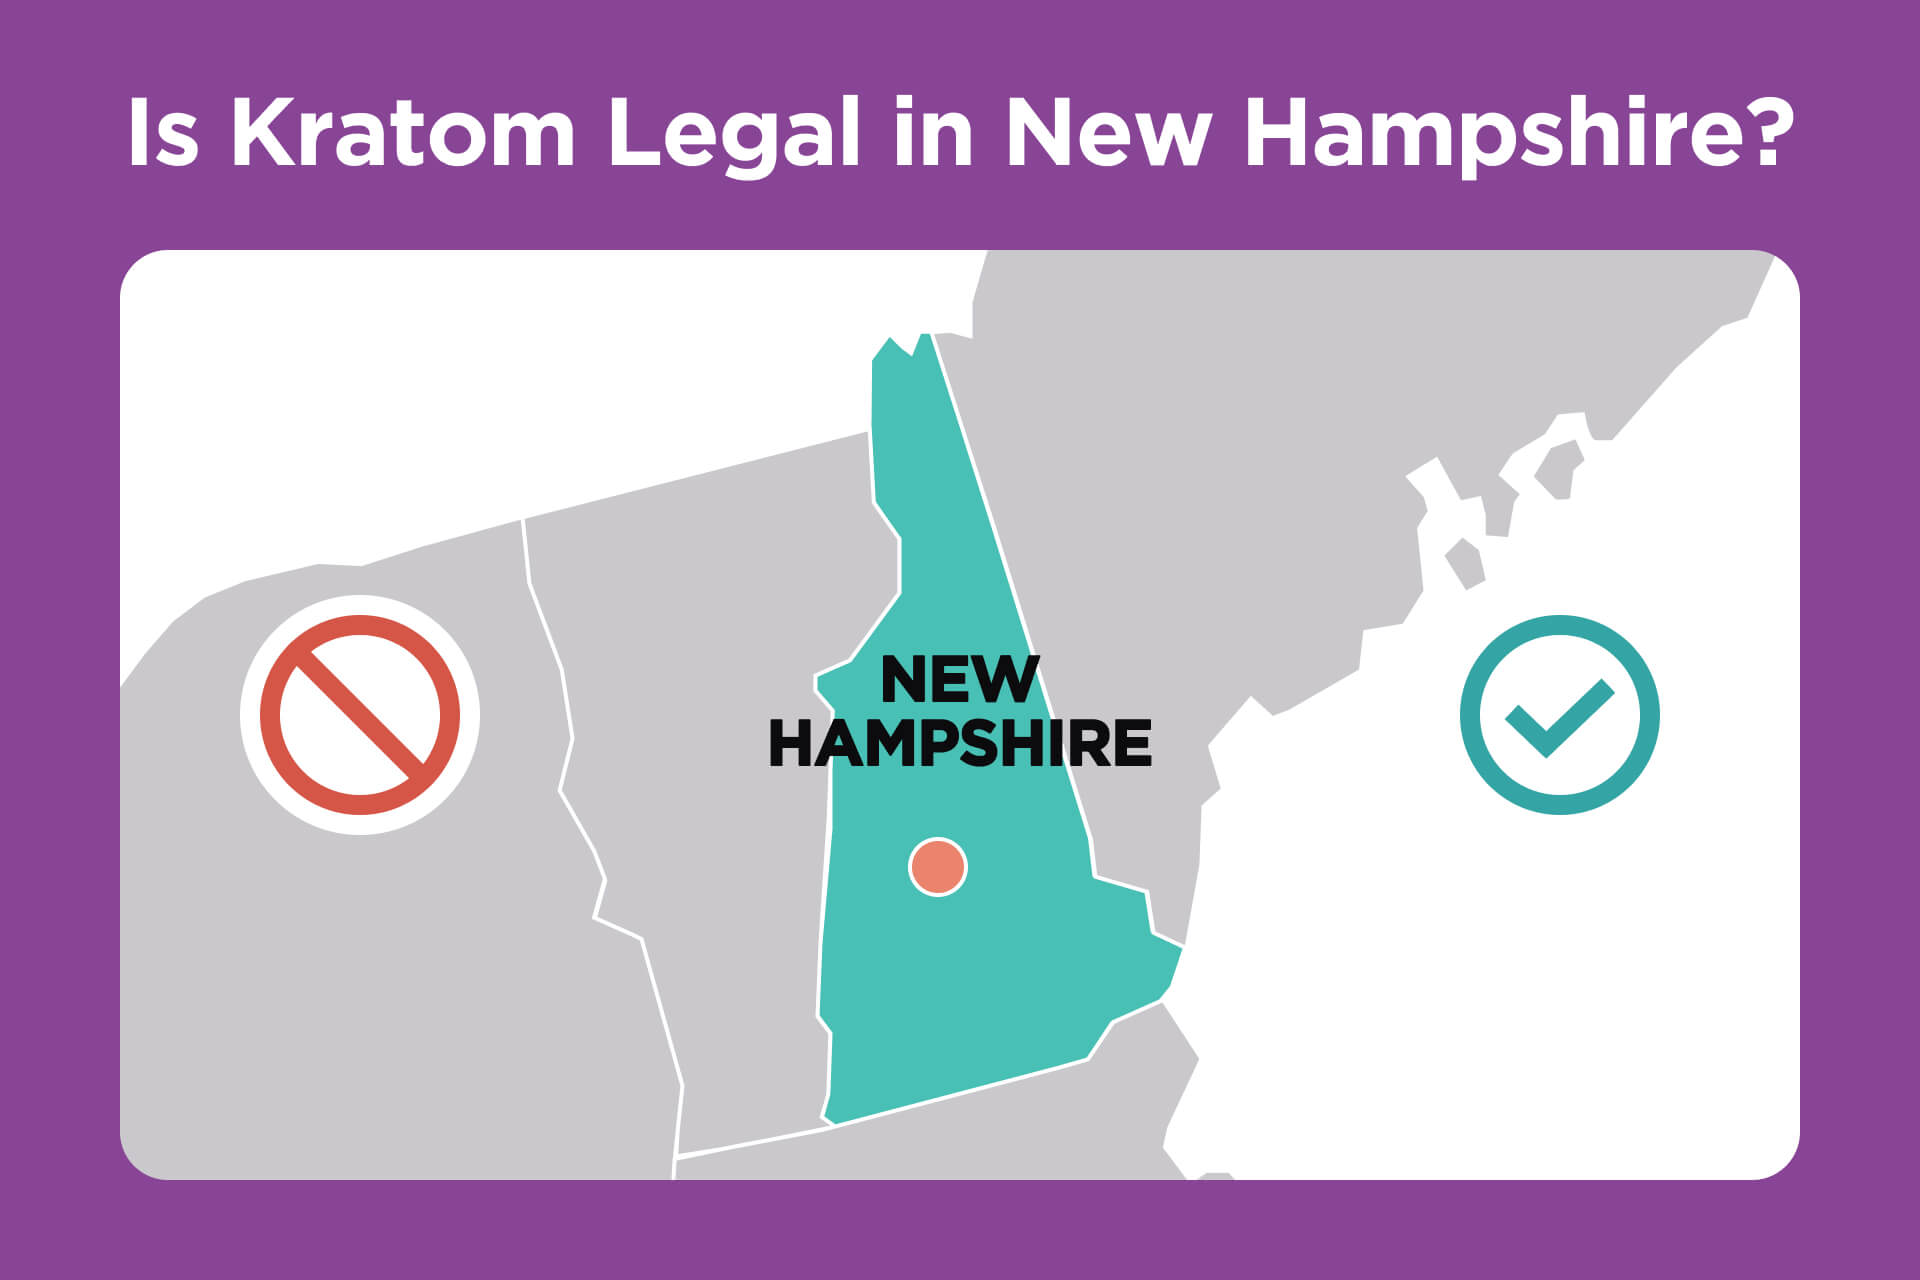 Is Kratom Legal in New Hampshire?